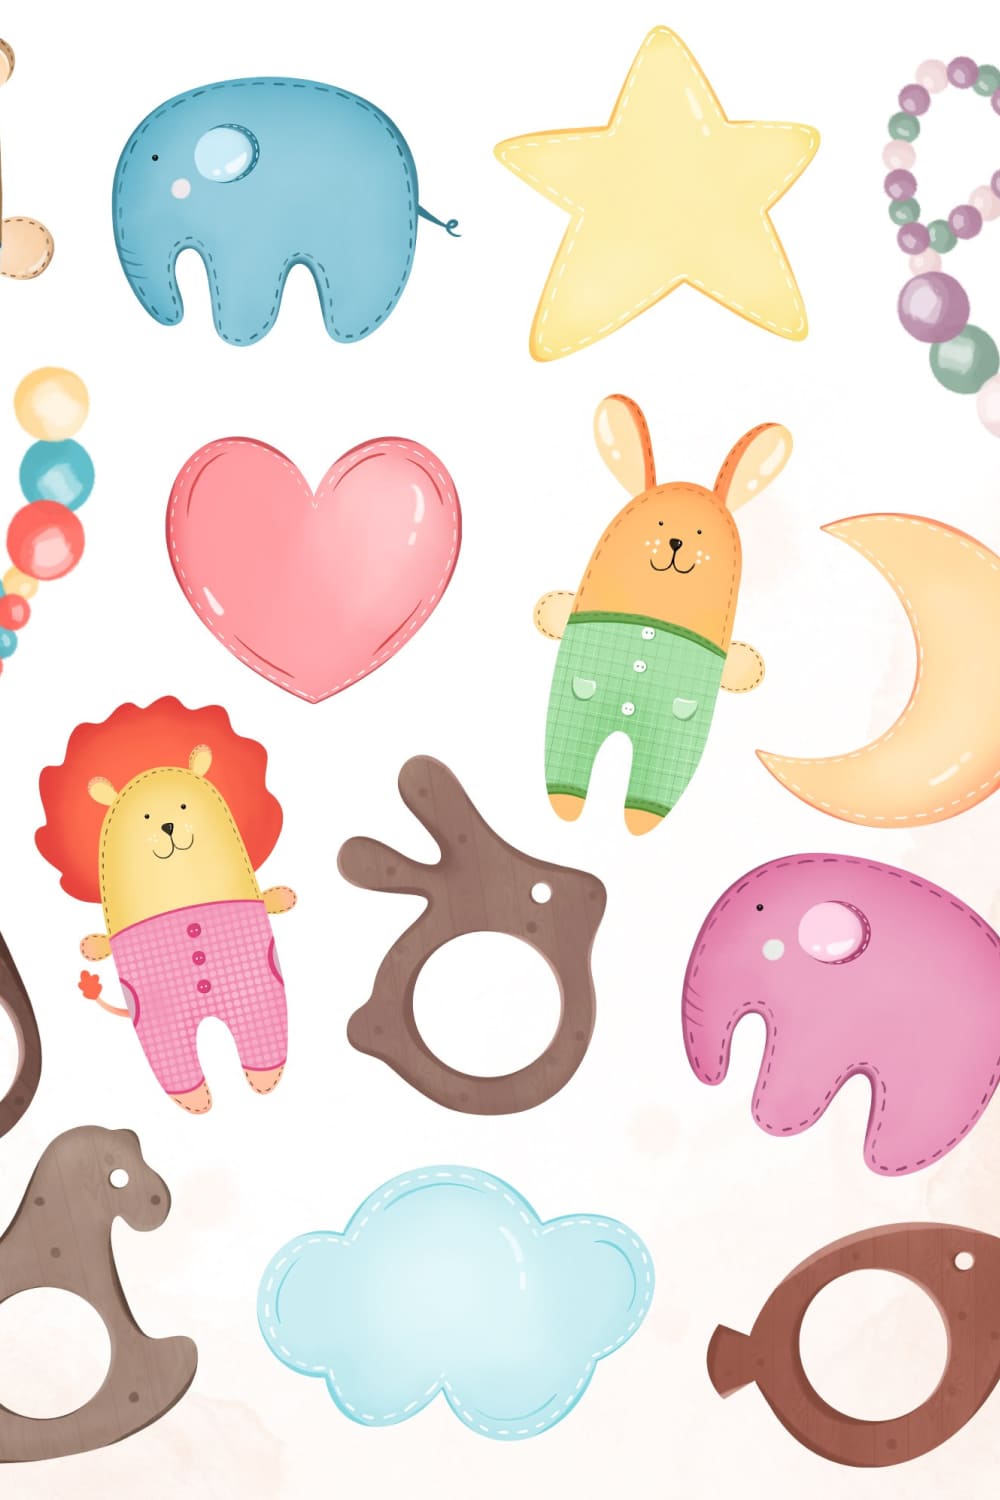 This is the sweetest graphic collection with cute babies, toys and floral elements in pastel colors.